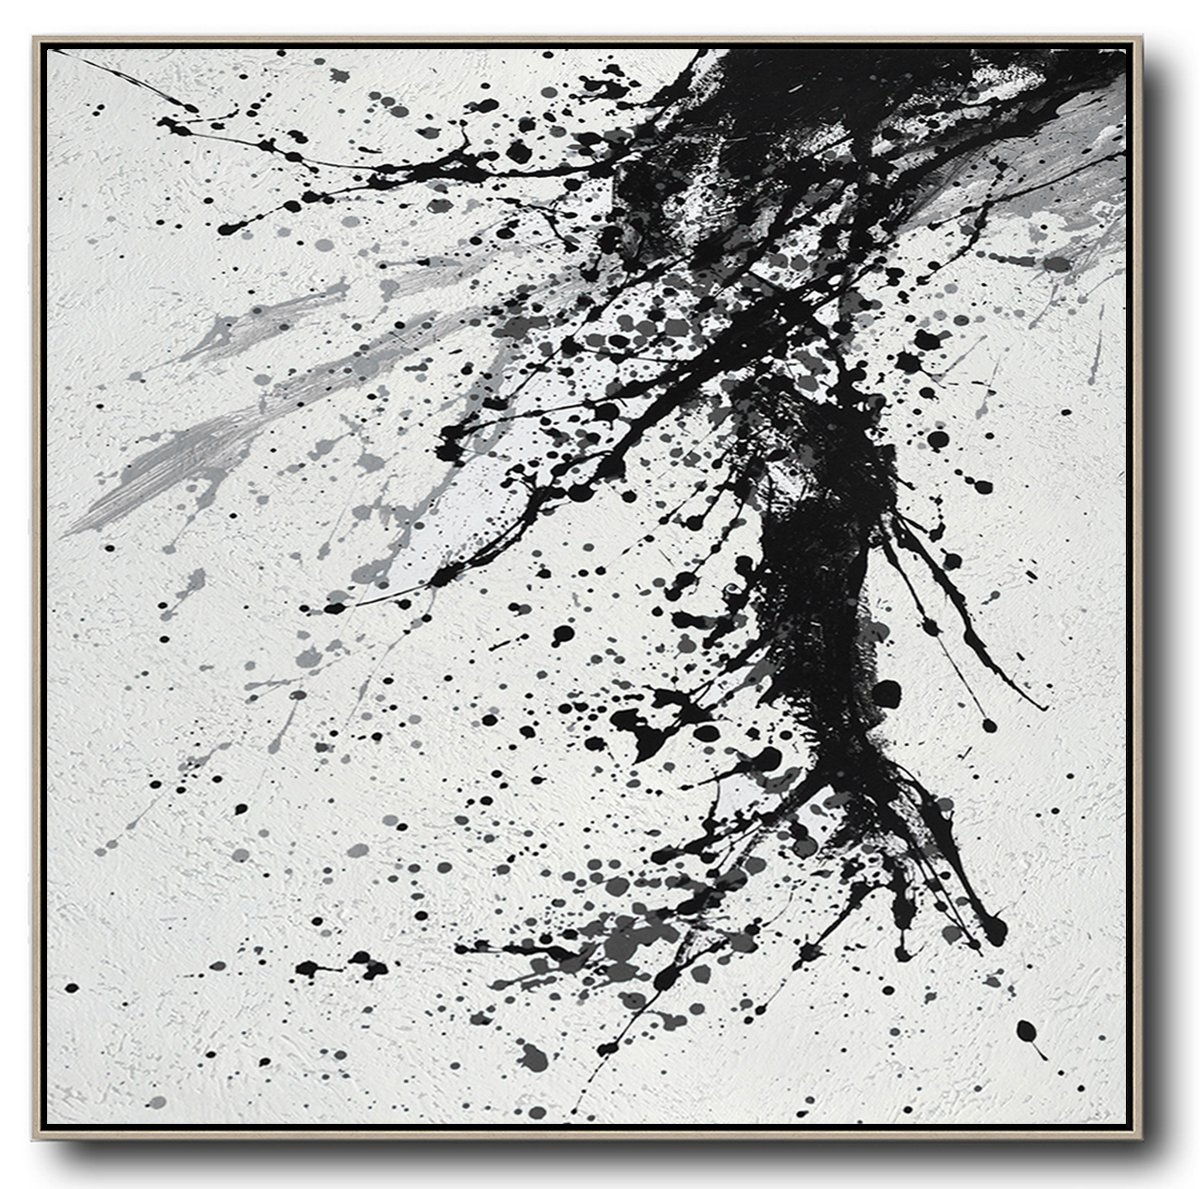 Extra Large Textured Painting On Canvas,Minimalist Drip Painting On Canvas, Black, White, Grey - Hand Paint Abstract Painting